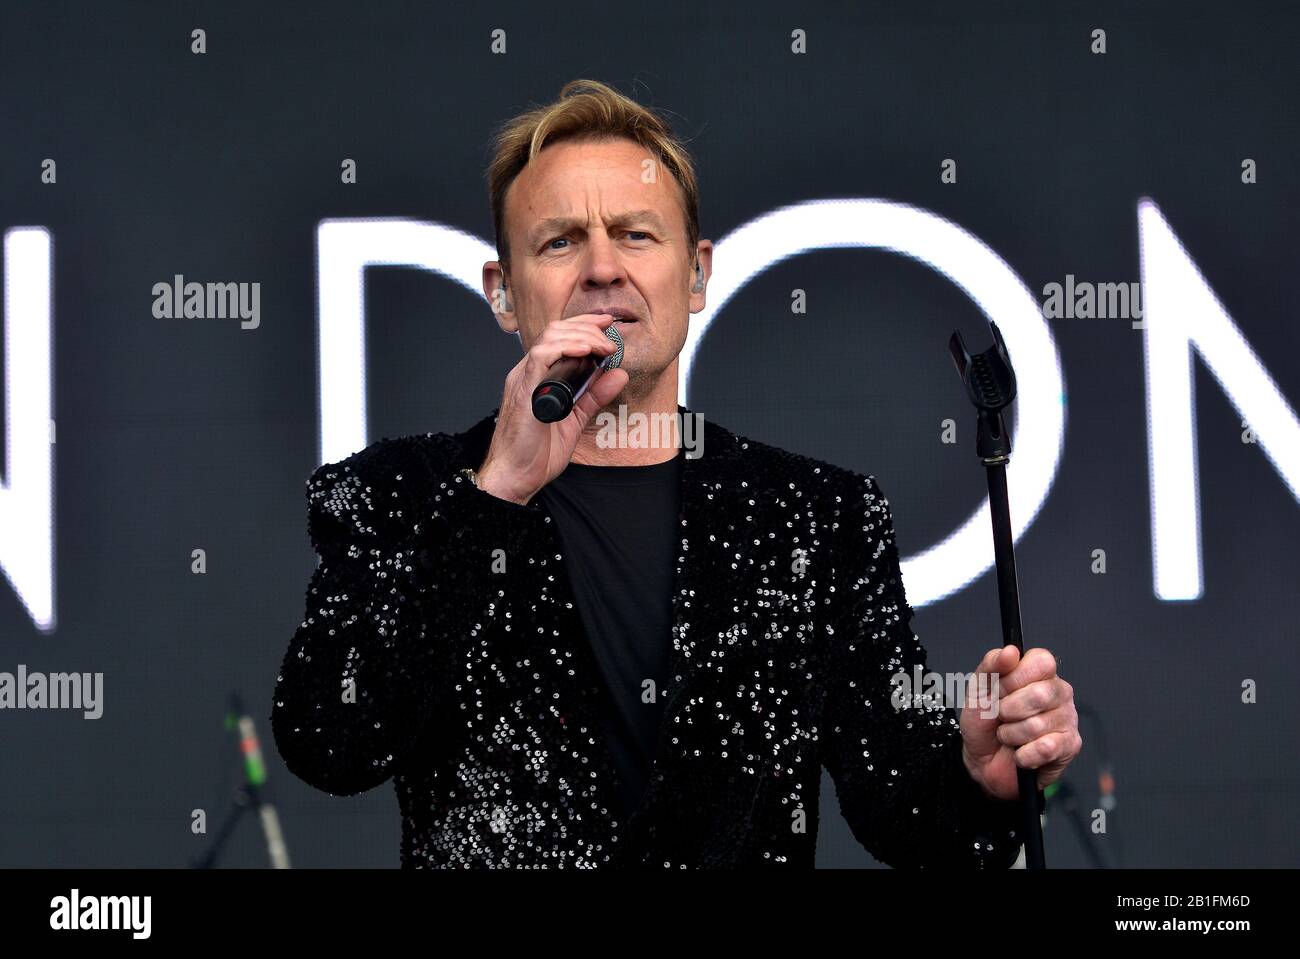 Jason Donovan preforming live on stage at music festival 2019 Stock Photo